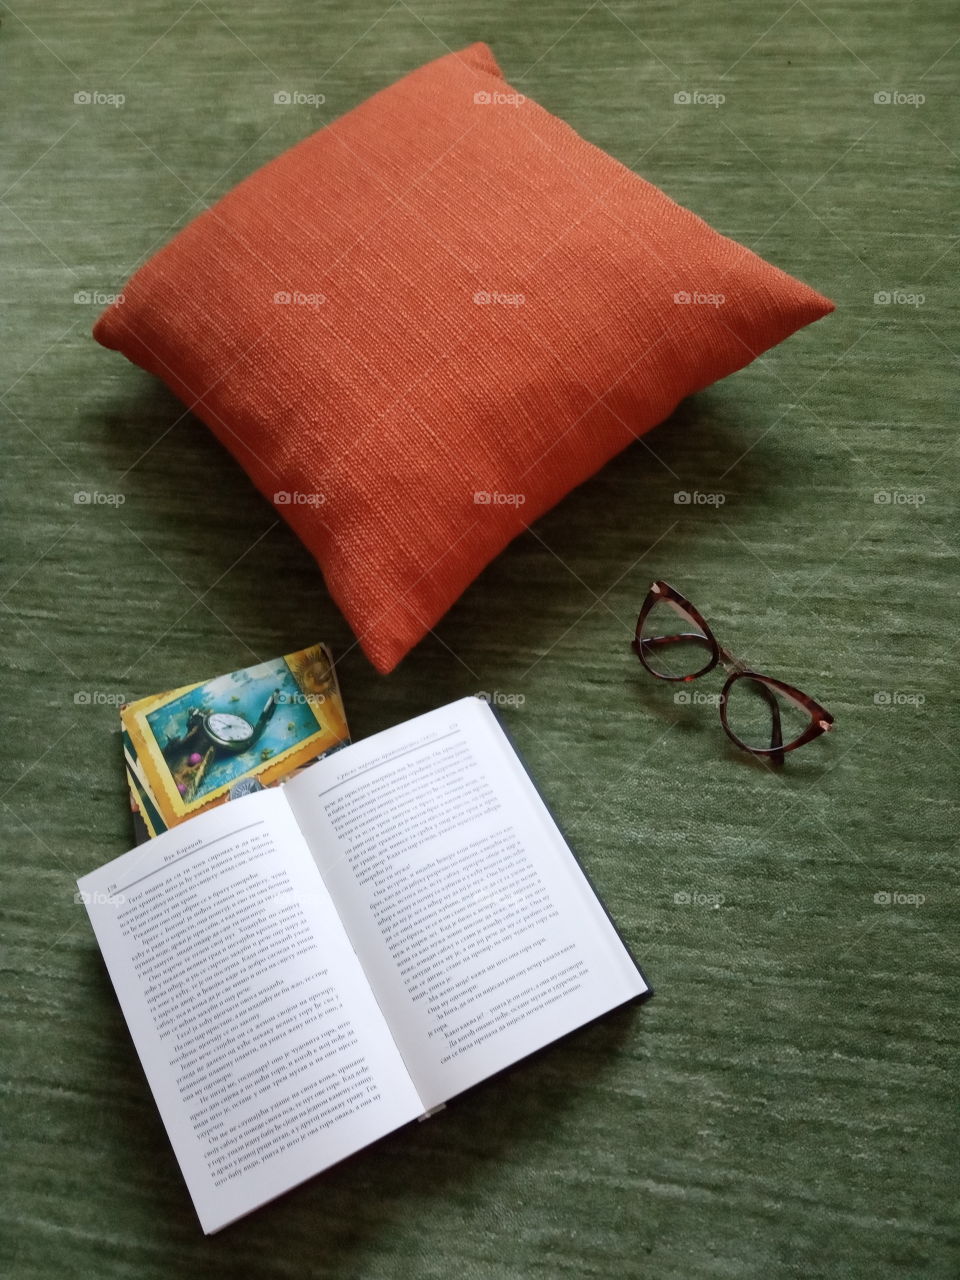 Combinations of colours and textures, shown with orange pillow, books and glasses.